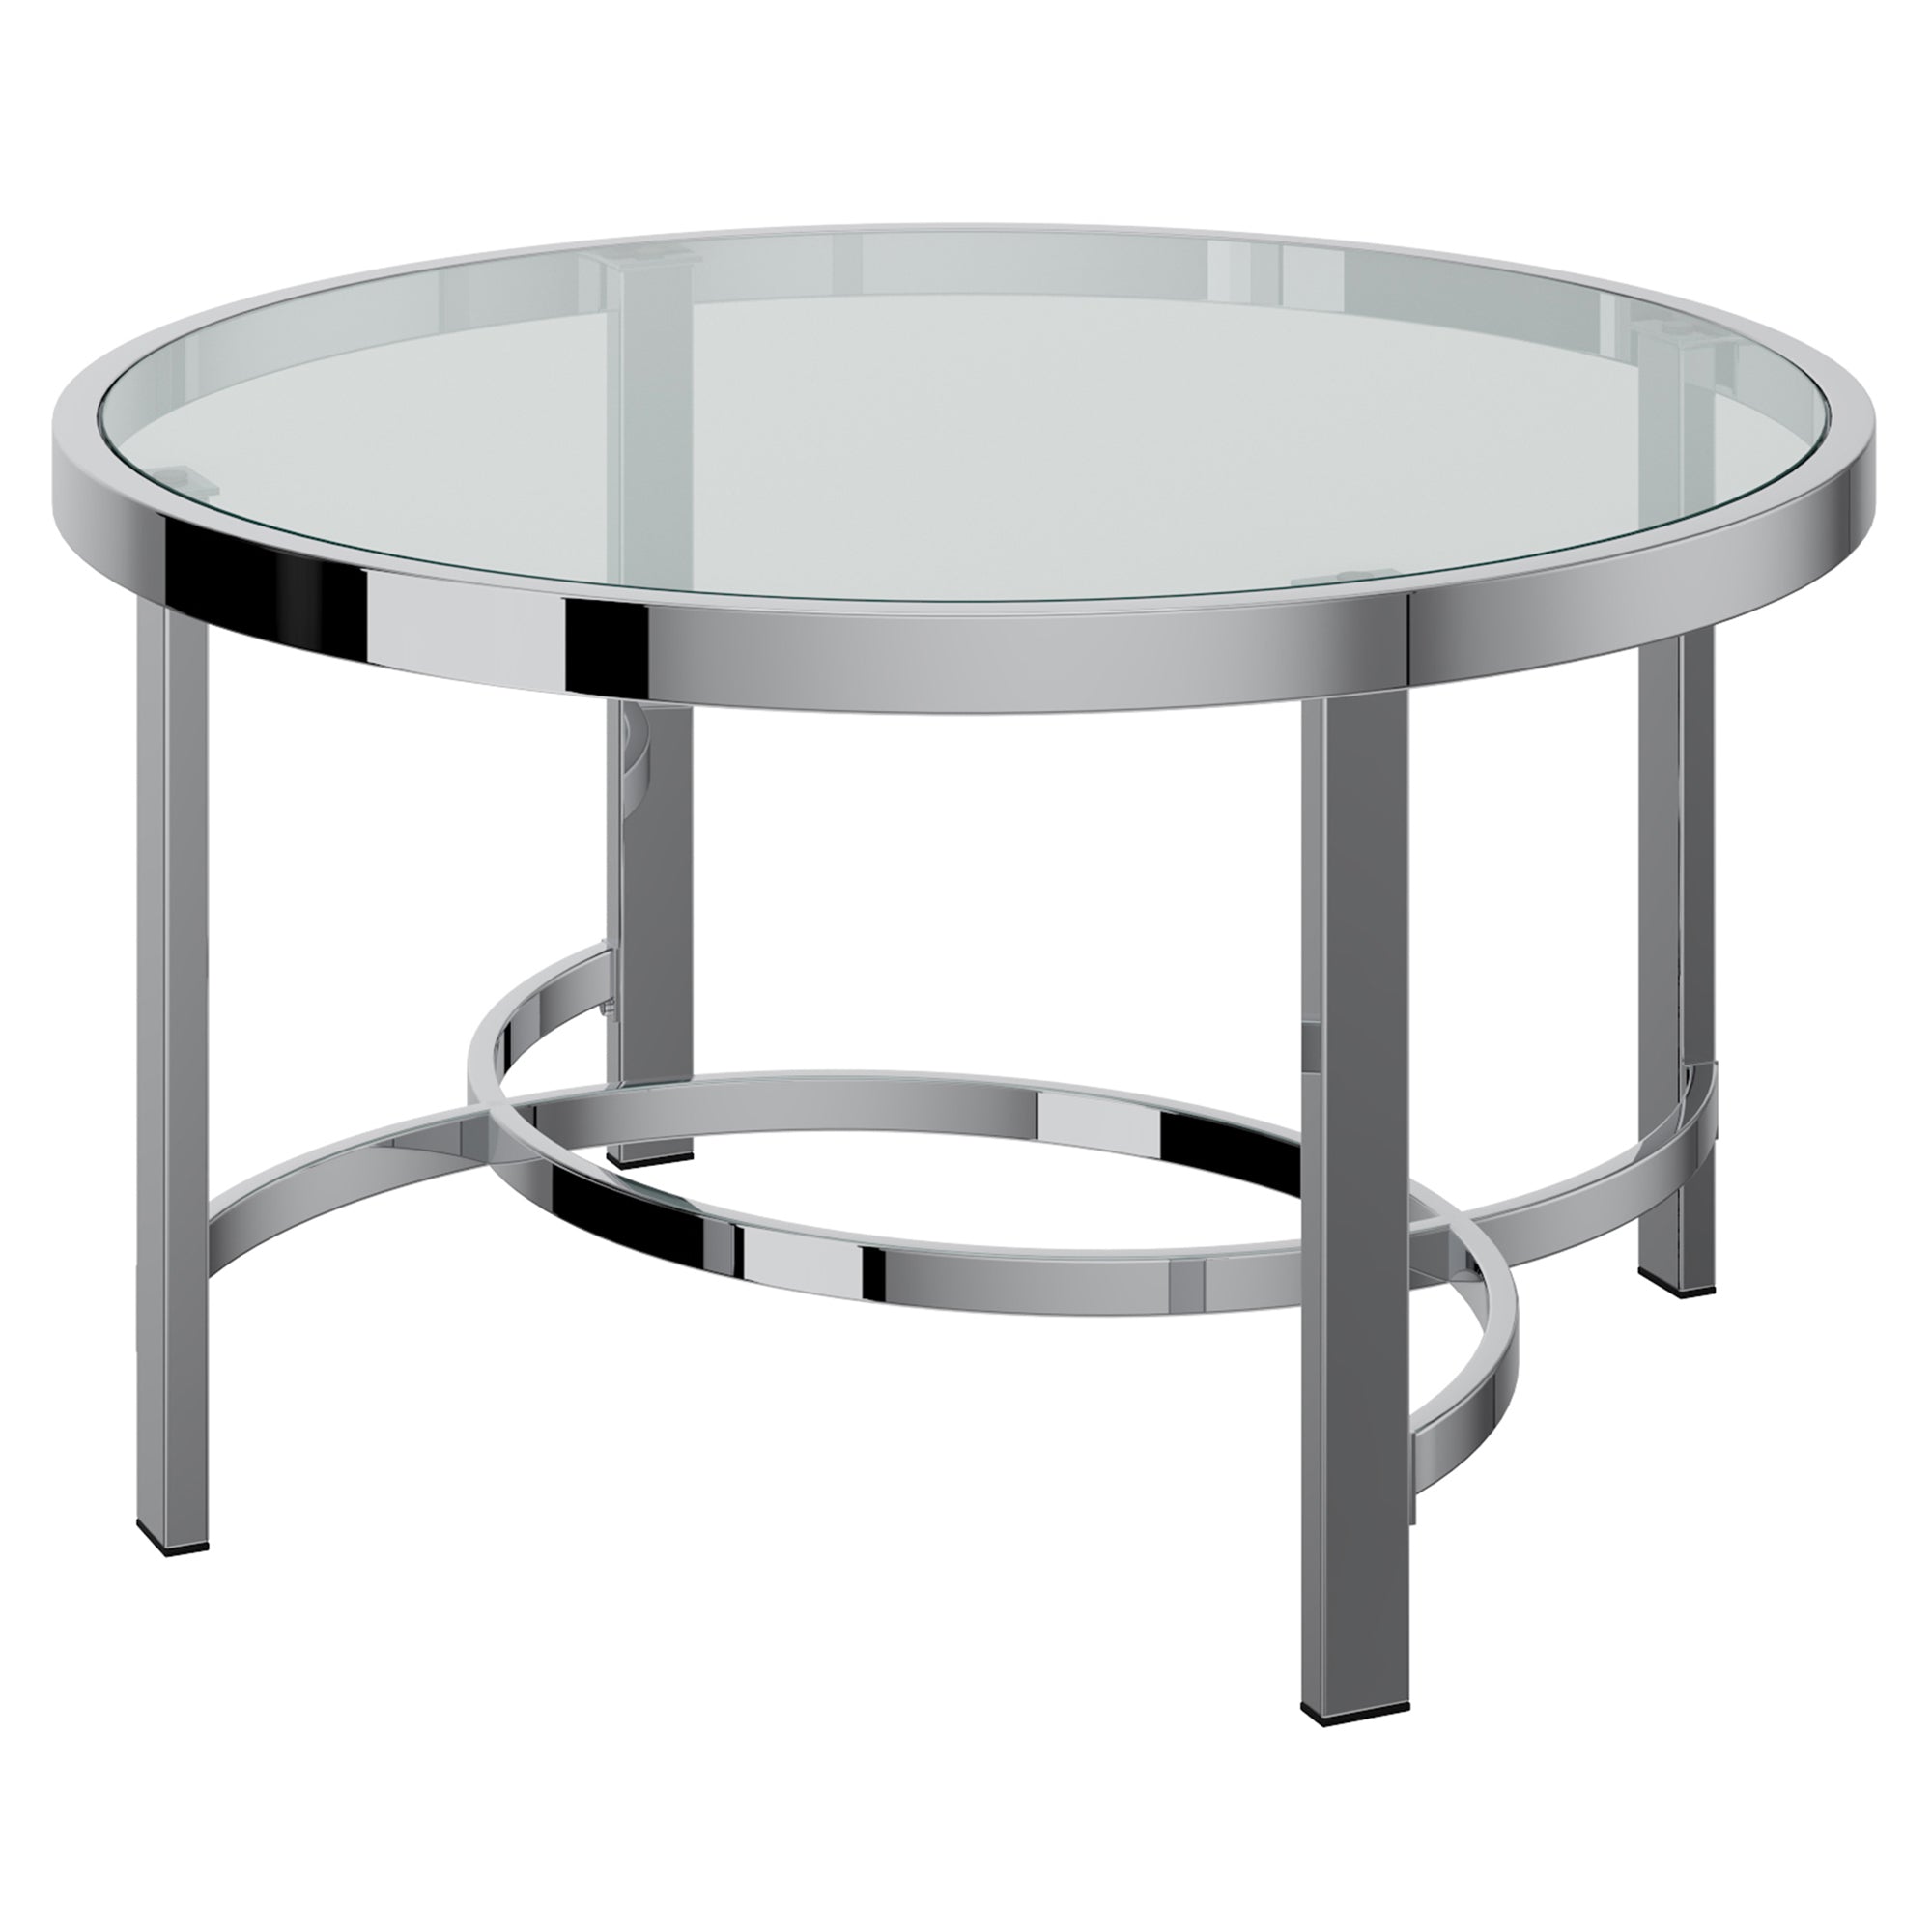 Strata Coffee Table in Chrome